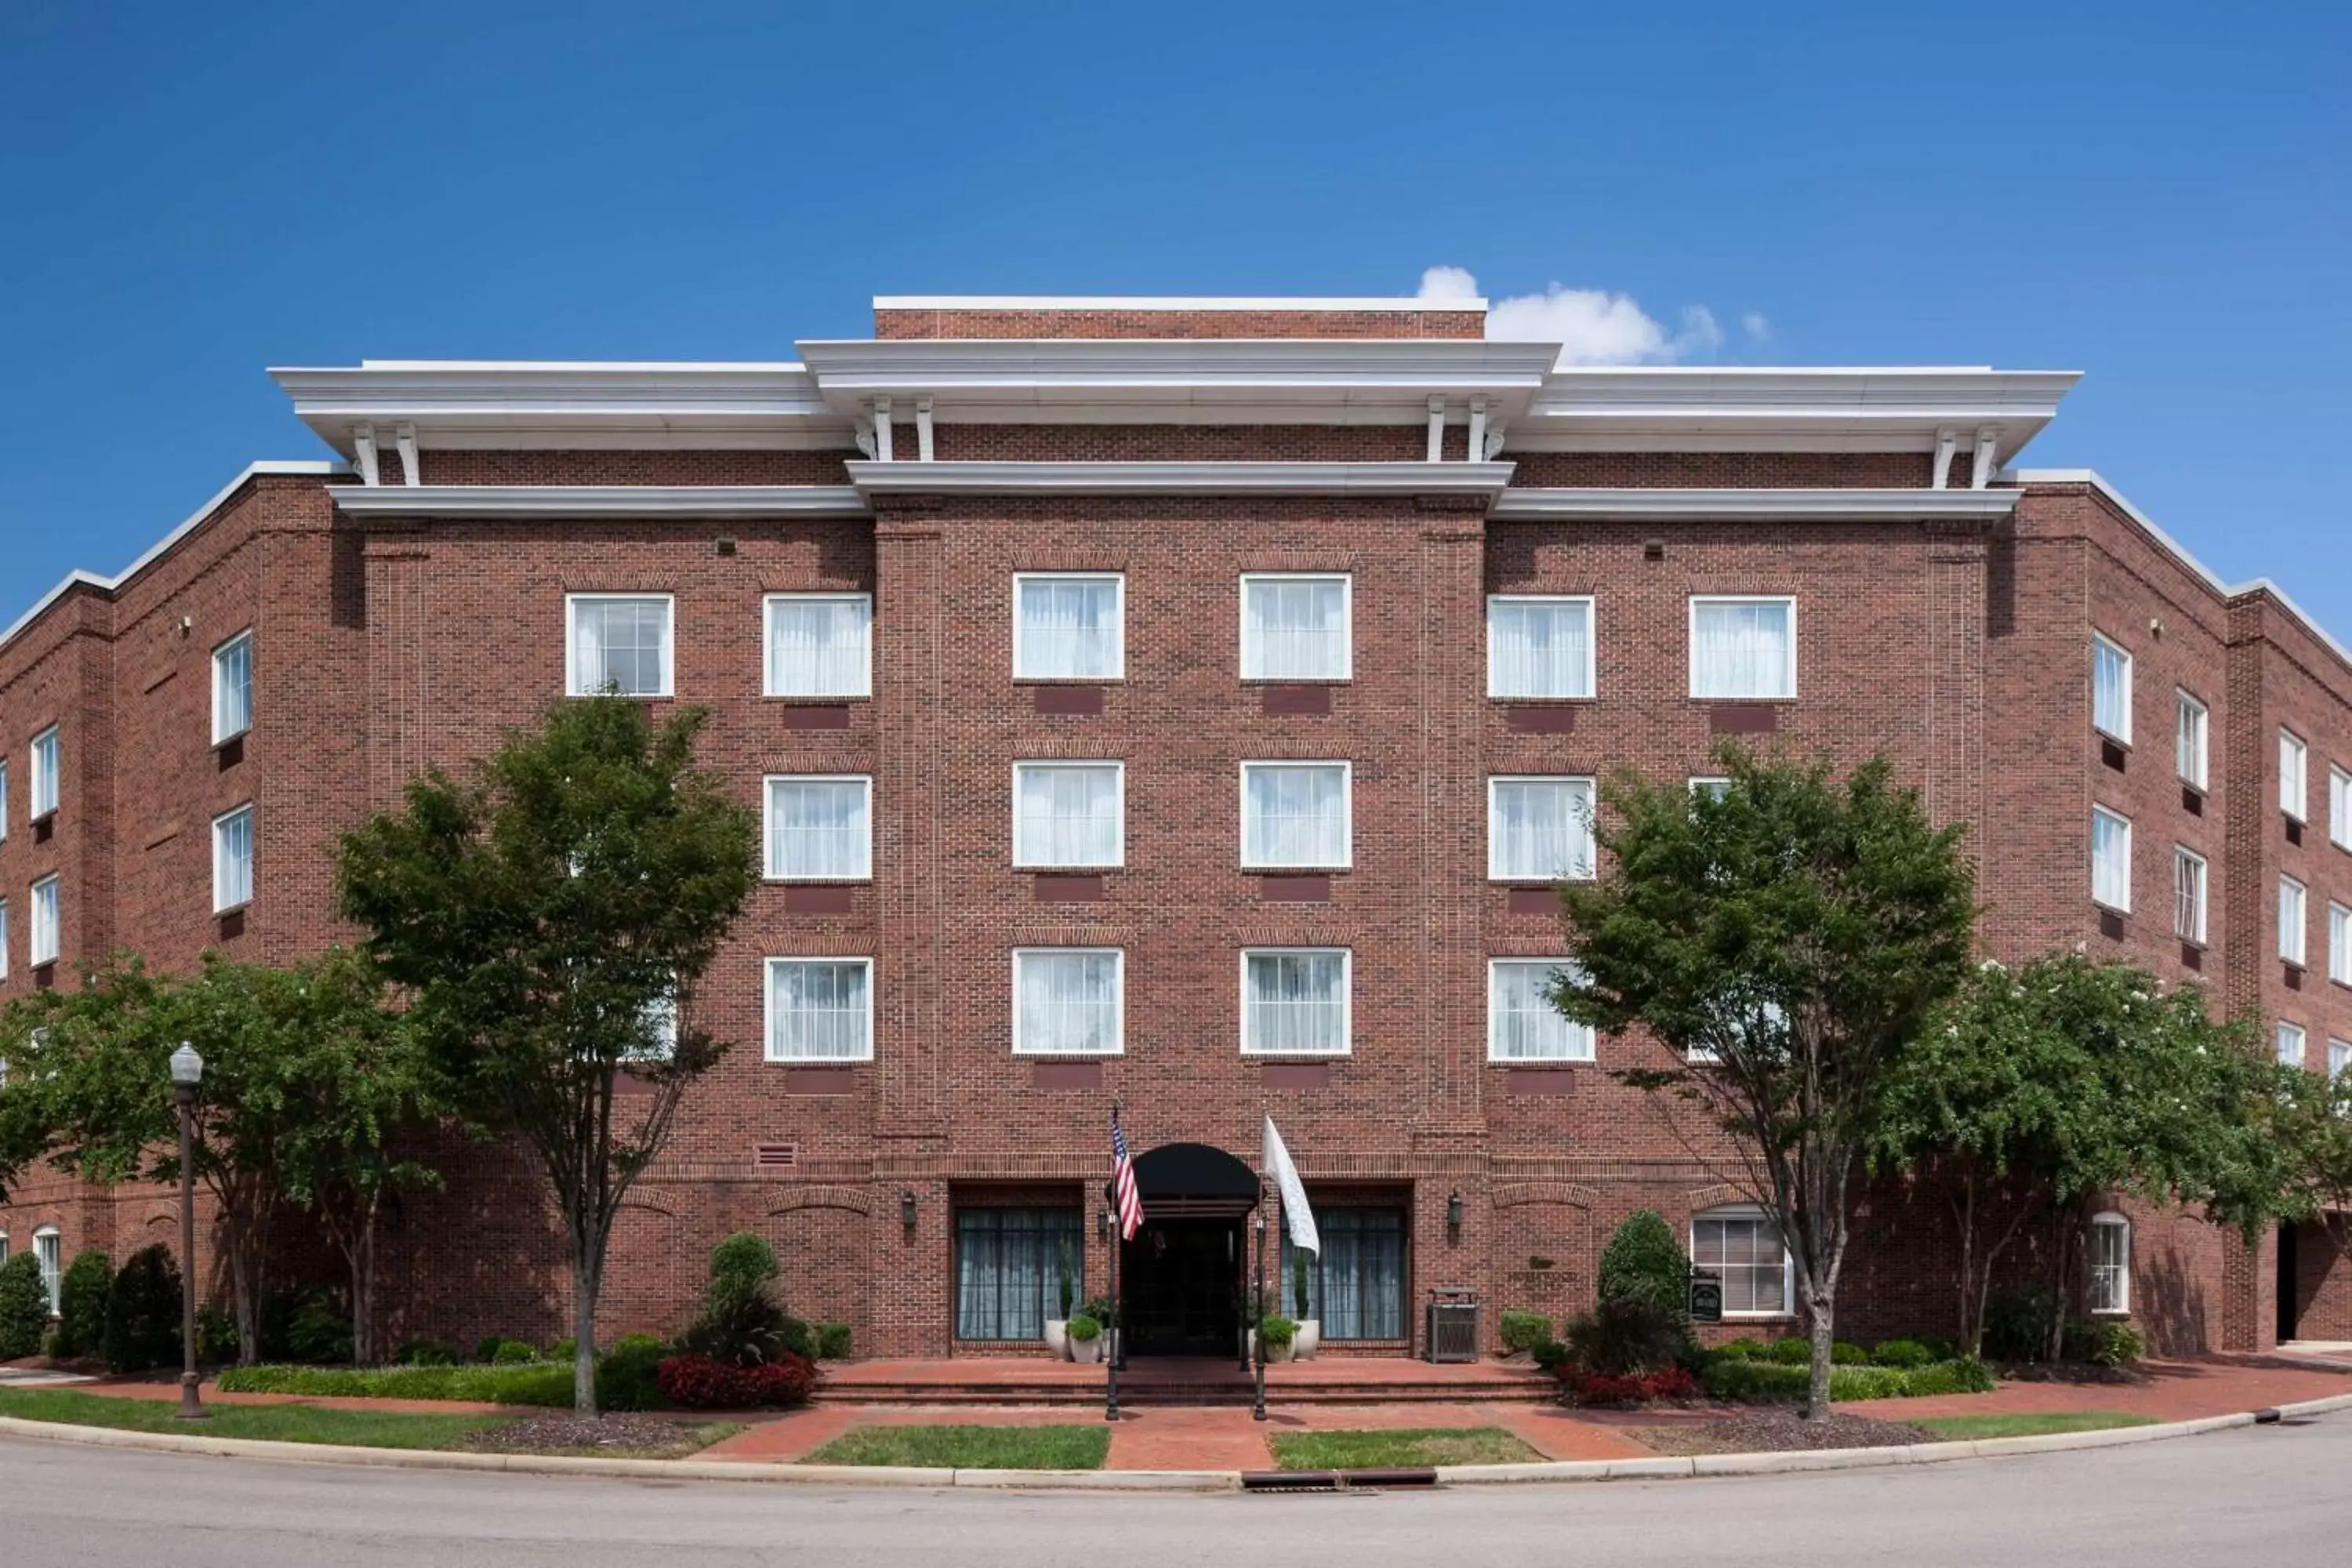 Property Building in Homewood Suites by Hilton Huntsville-Village of Providence